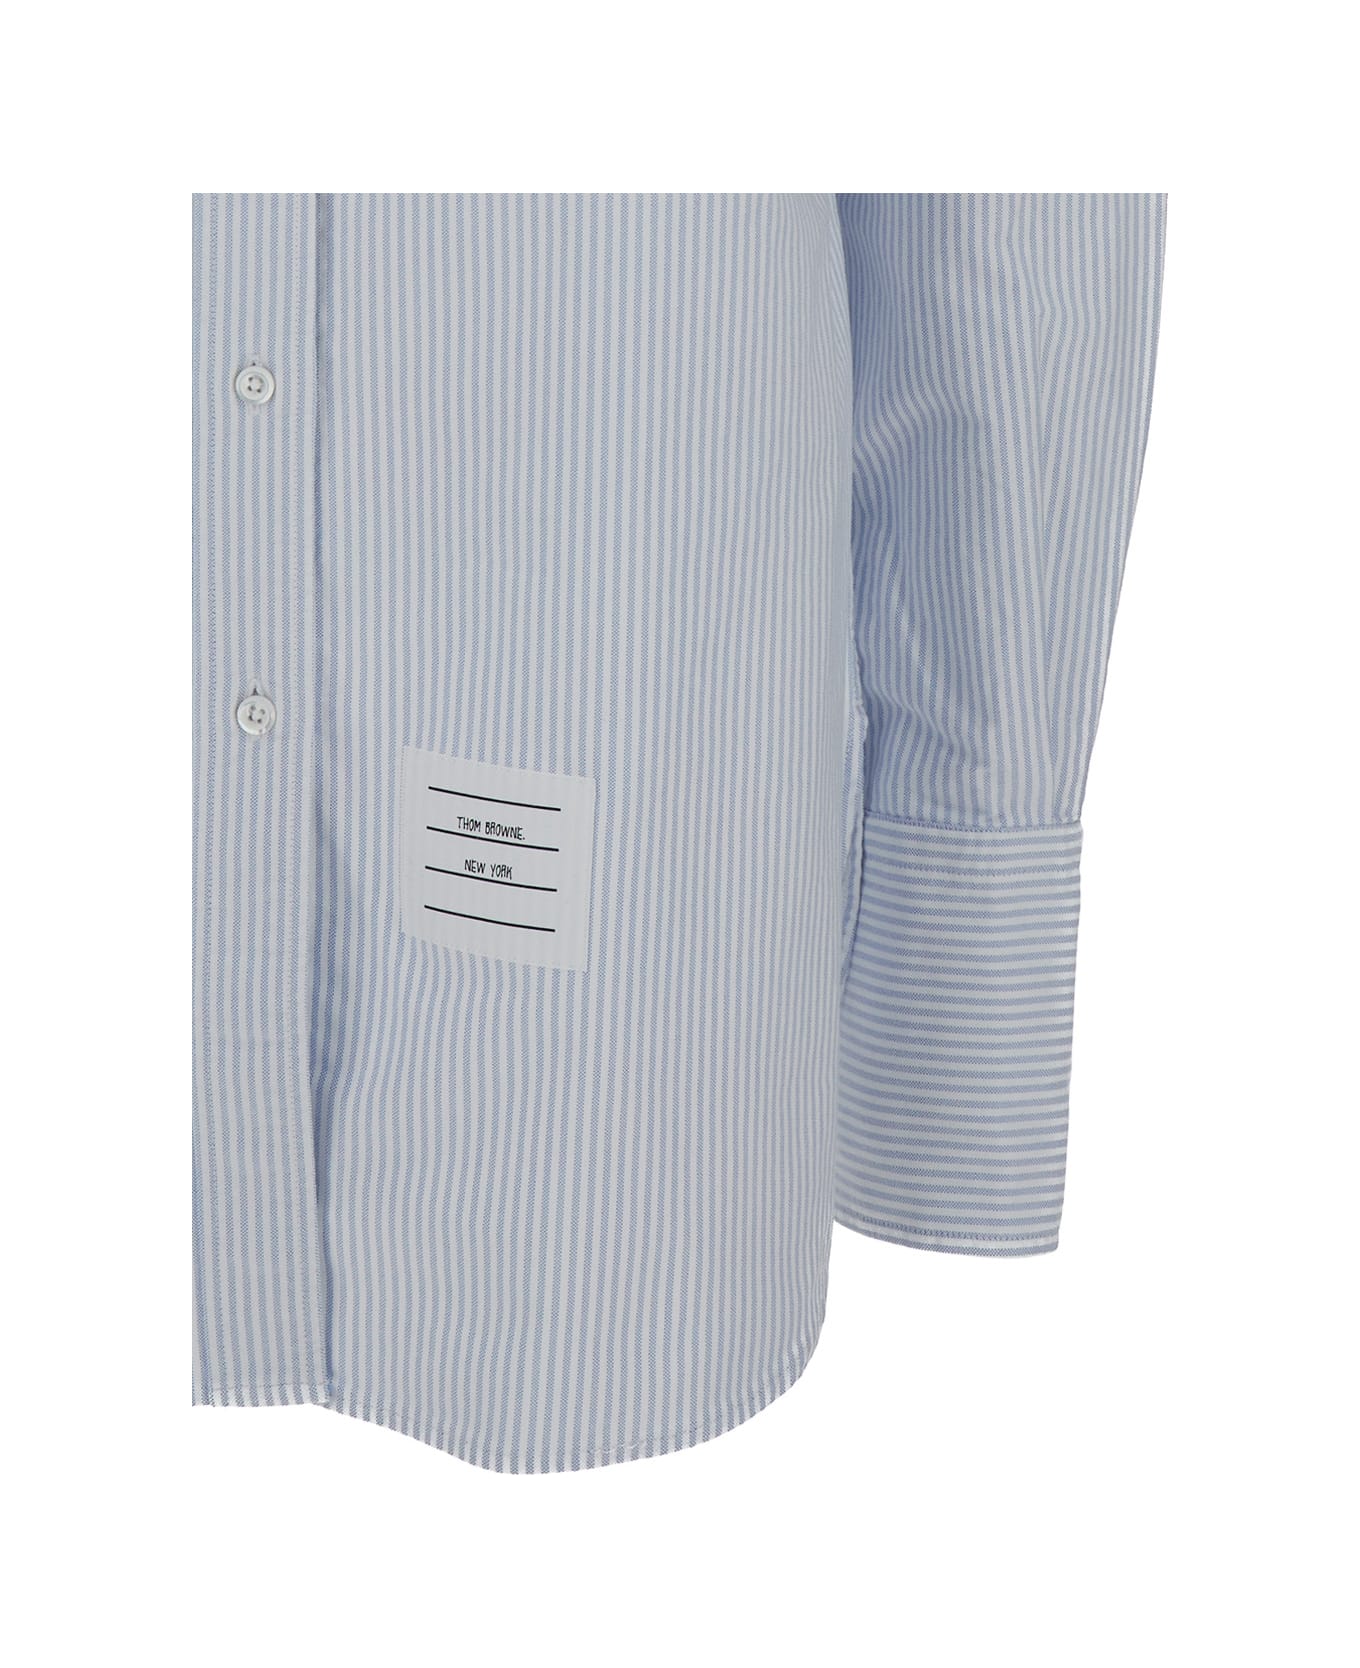 Thom Browne Exaggerated Easy Fit Point Collar Shirt In University Stripe W/ Woven 4 Bar Stripe Oxfordw - Blu